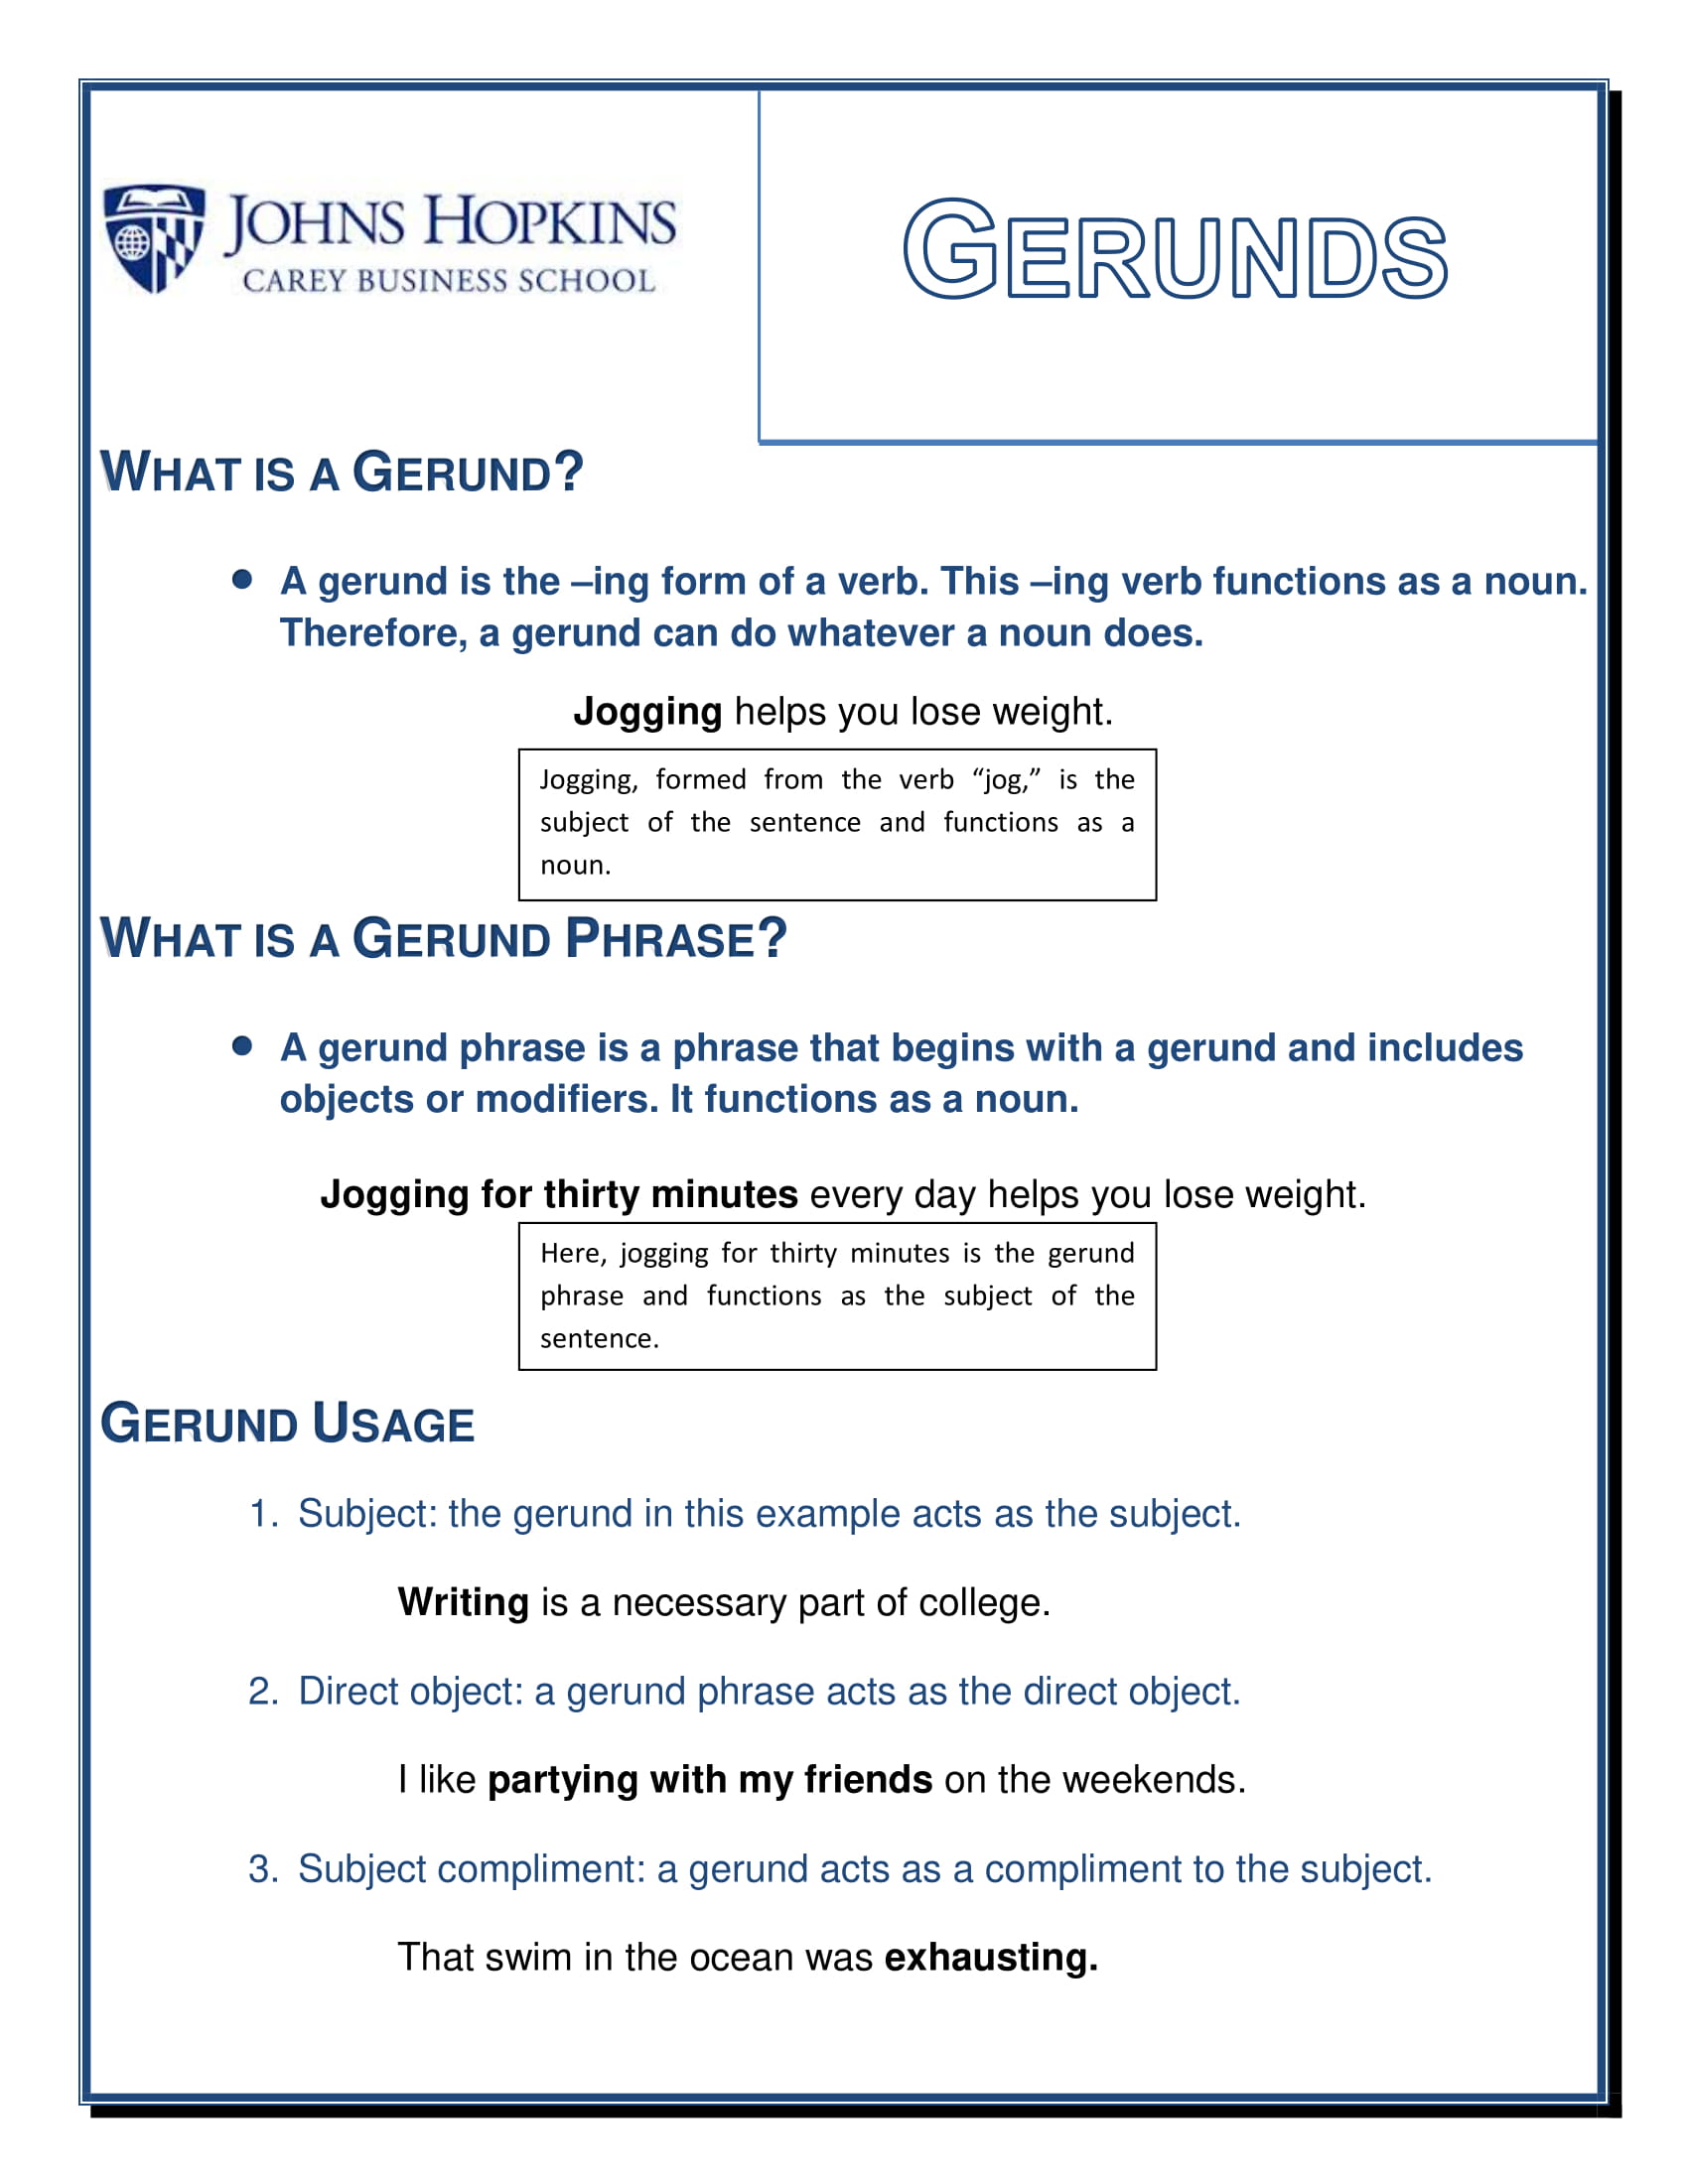 gerunds discussion guide example